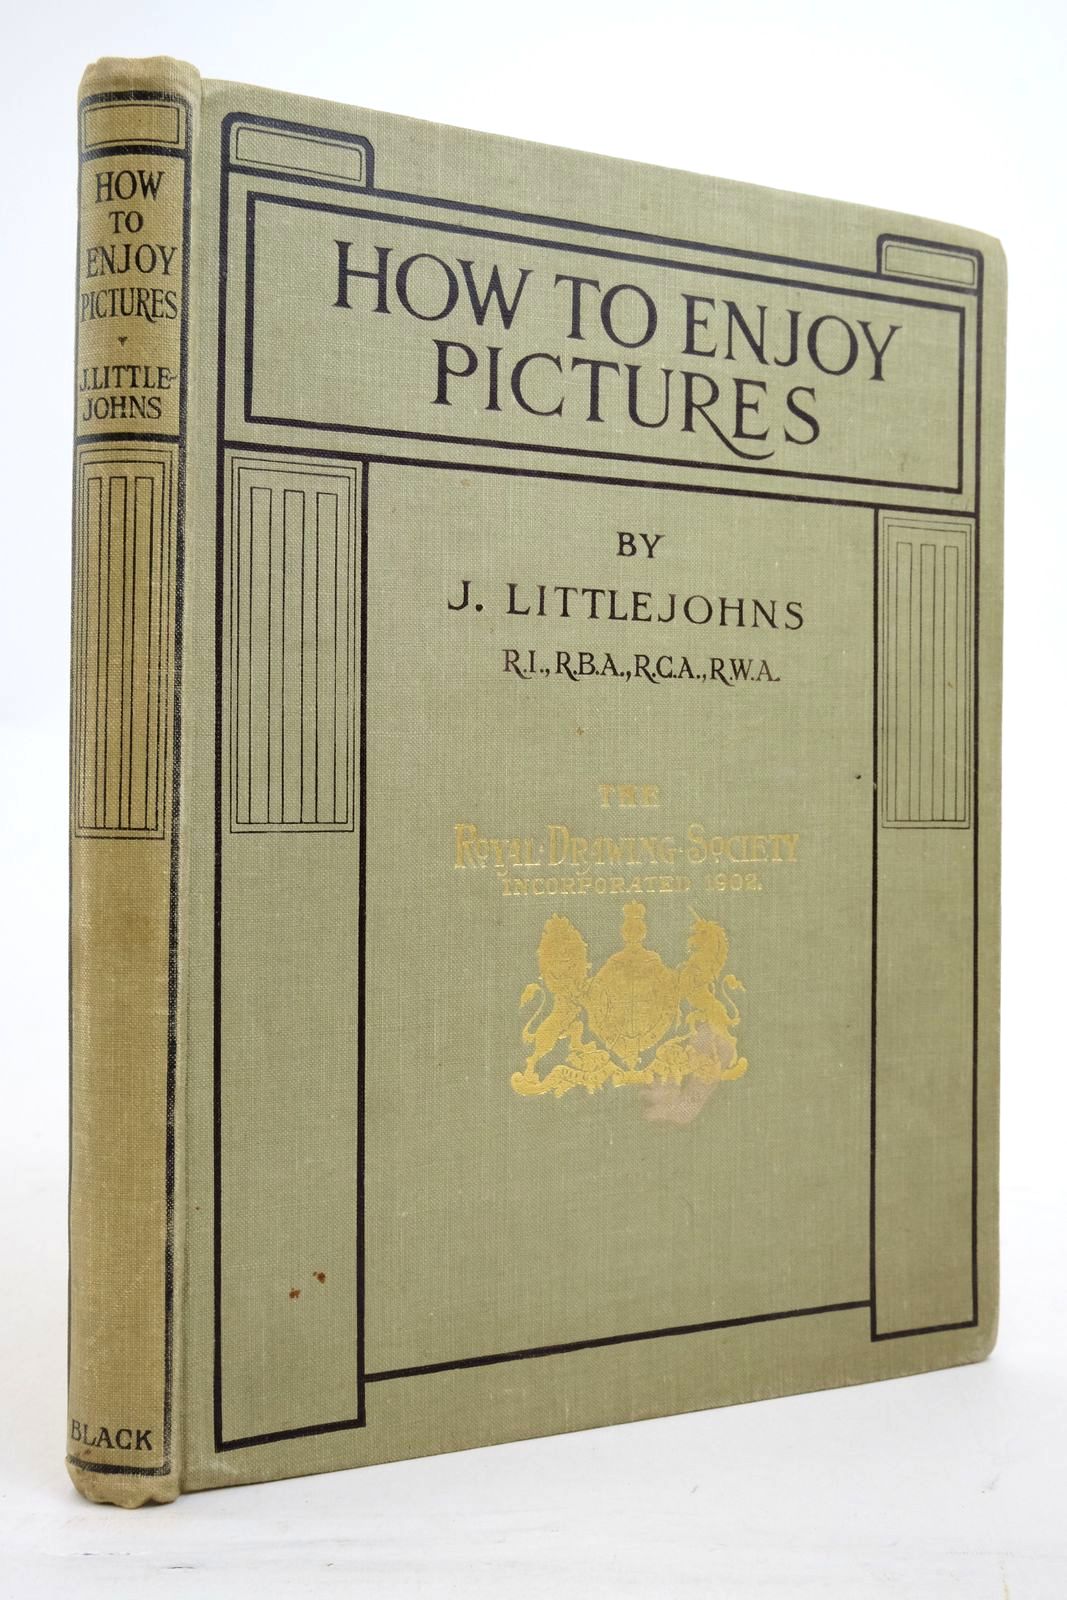 Photo of HOW TO ENJOY PICTURES written by Littlejohns, J. illustrated by Velasquez, Diego Rembrandt, Morland, George et al., published by A. &amp; C. Black Ltd. (STOCK CODE: 2137578)  for sale by Stella & Rose's Books